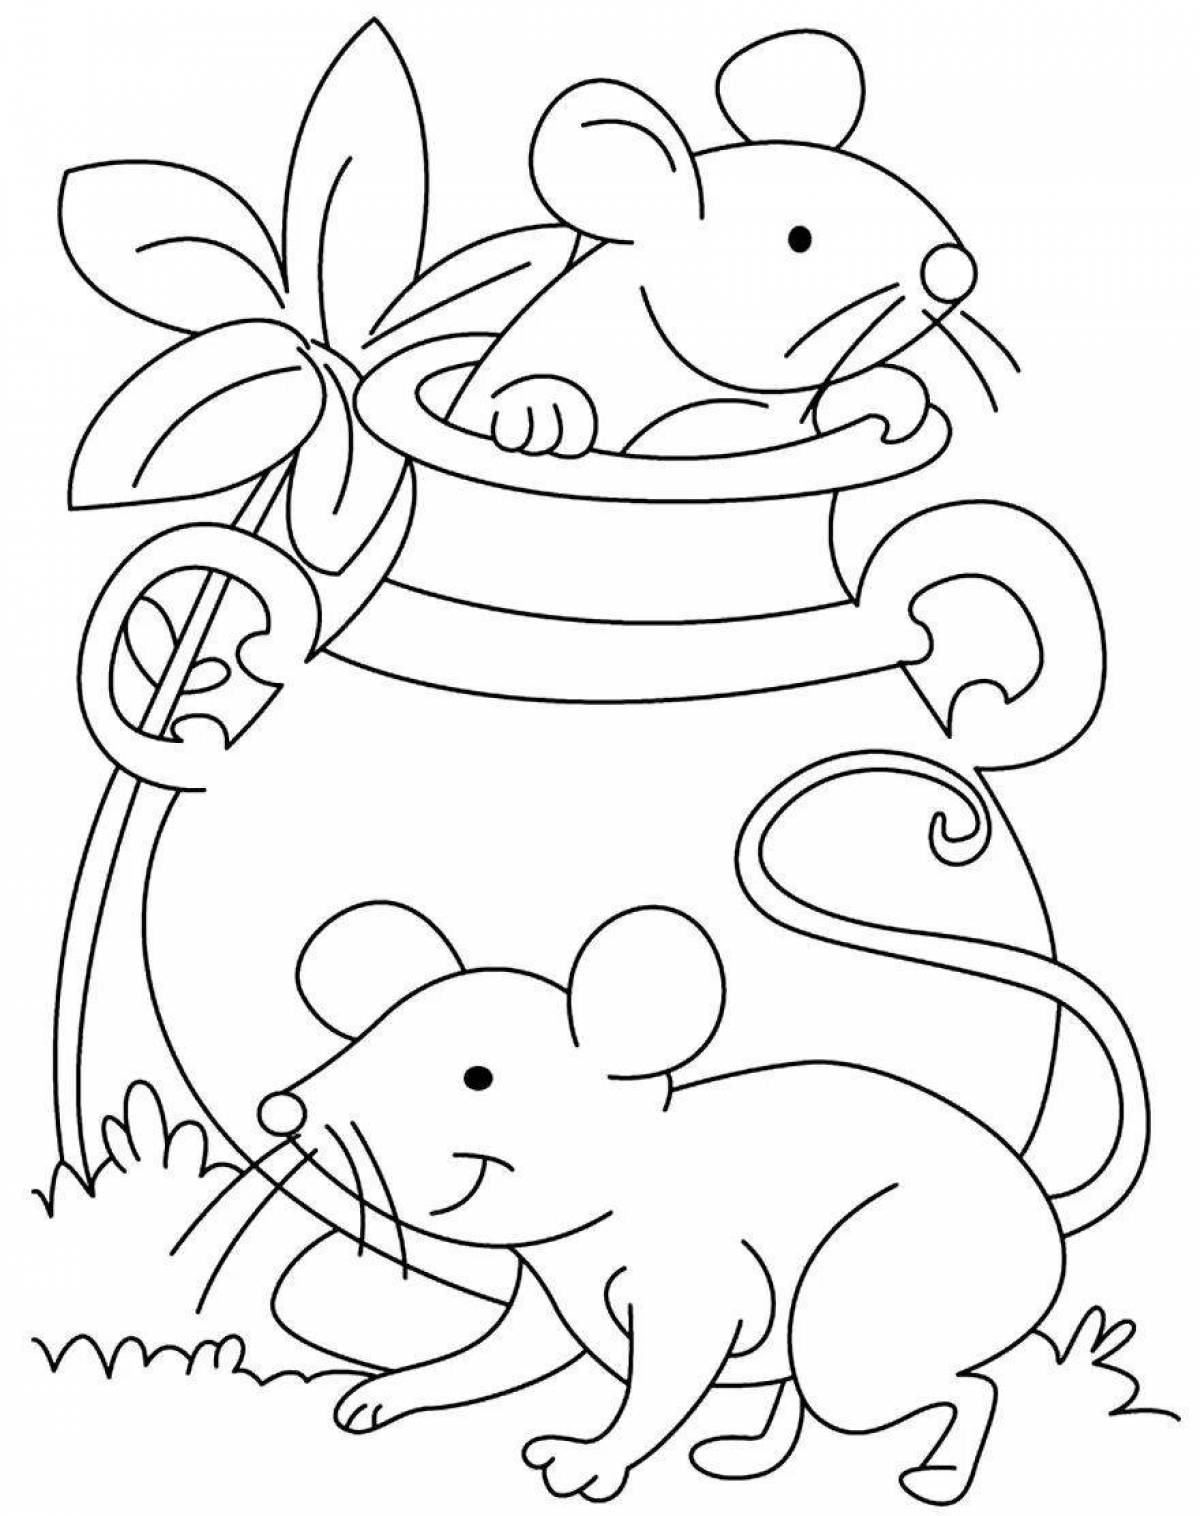 Children's coloring mouse for children 3-4 years old